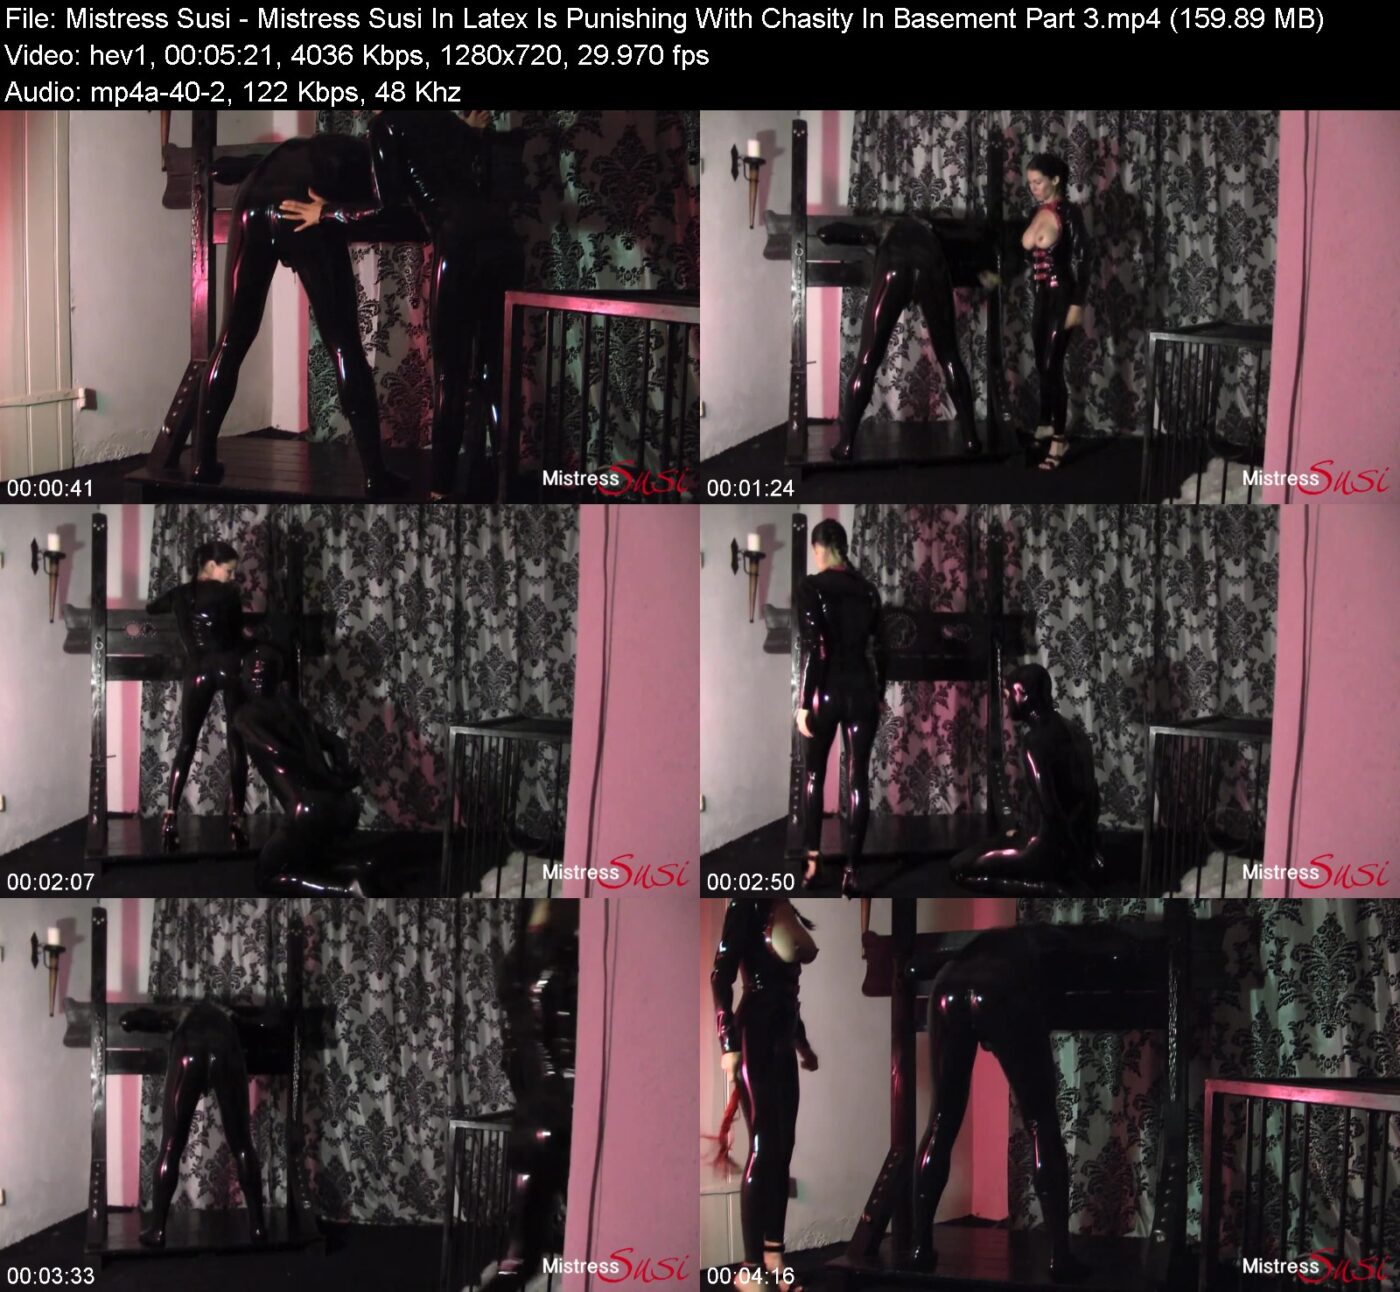 Actress: Mistress Susi. Title and Studio: Mistress Susi In Latex Is Punishing With Chasity In Basement Part 3